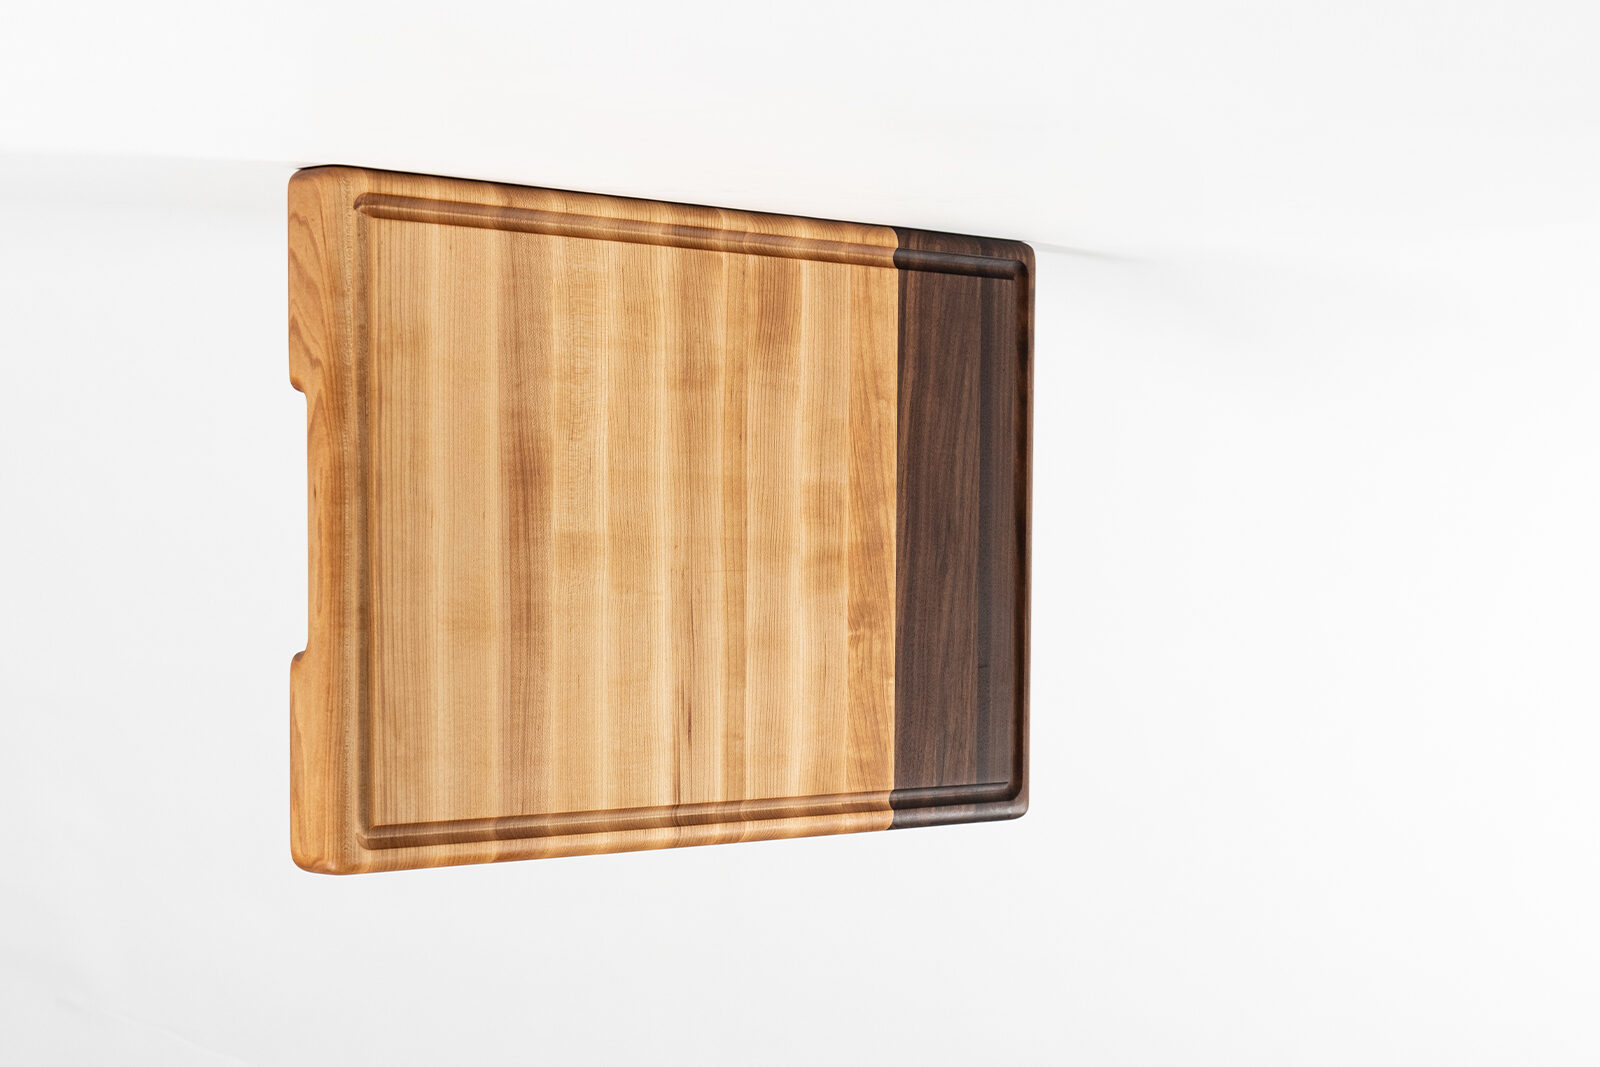 Best Cutting Board for Brisket - Extra Large Wood Board is Best